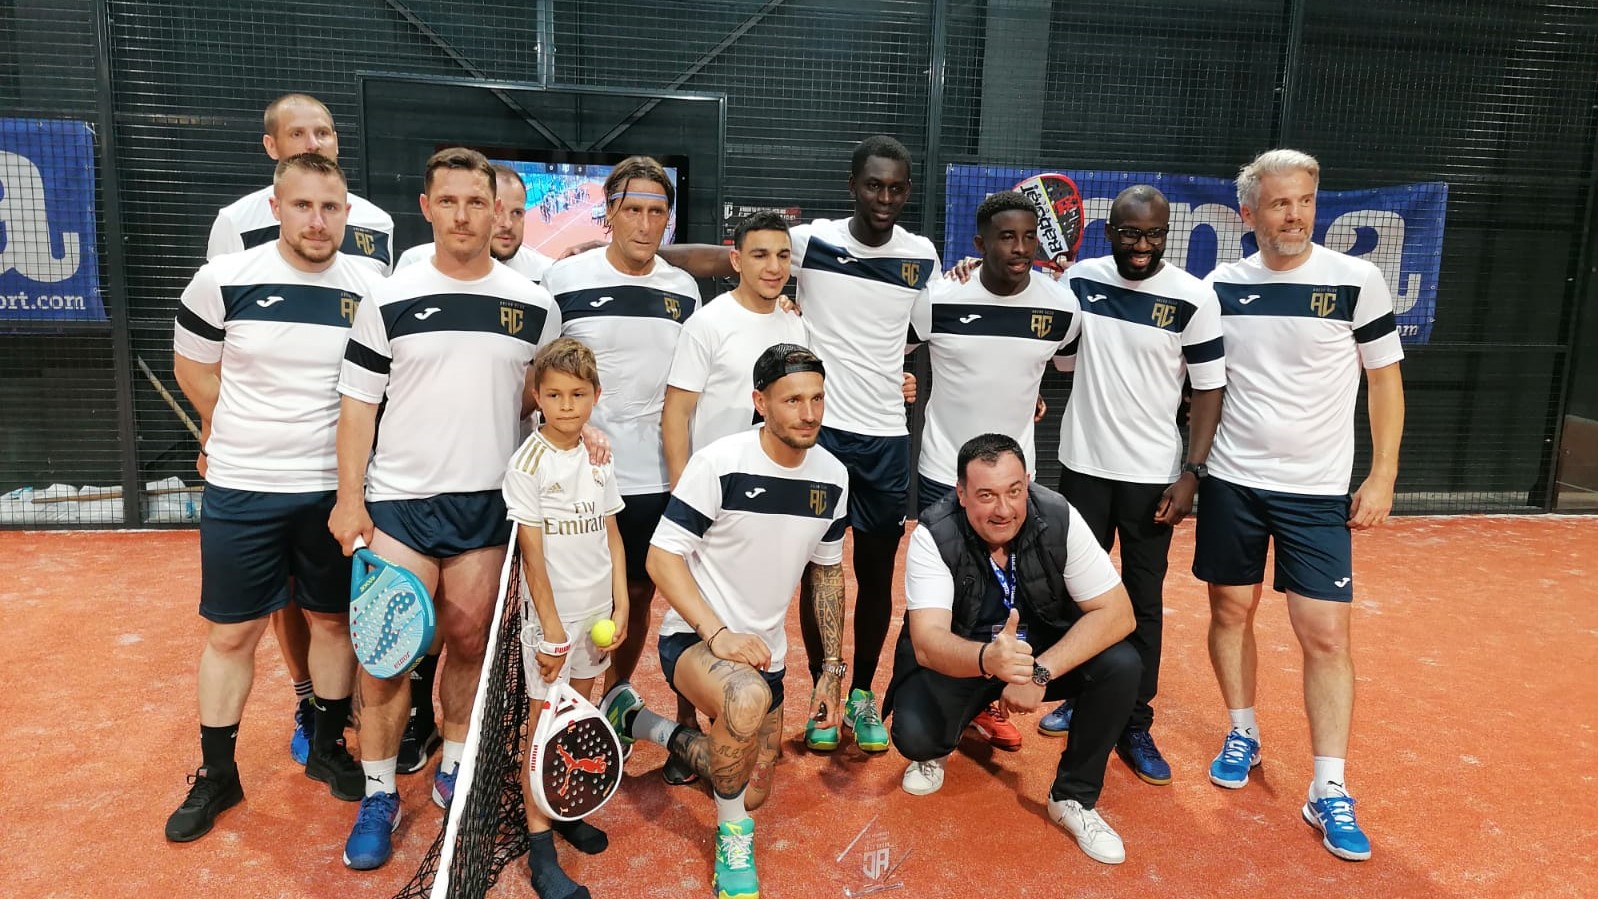 The players of LOSC 2011 enjoy themselves at the padel at the Halluin Arena Club